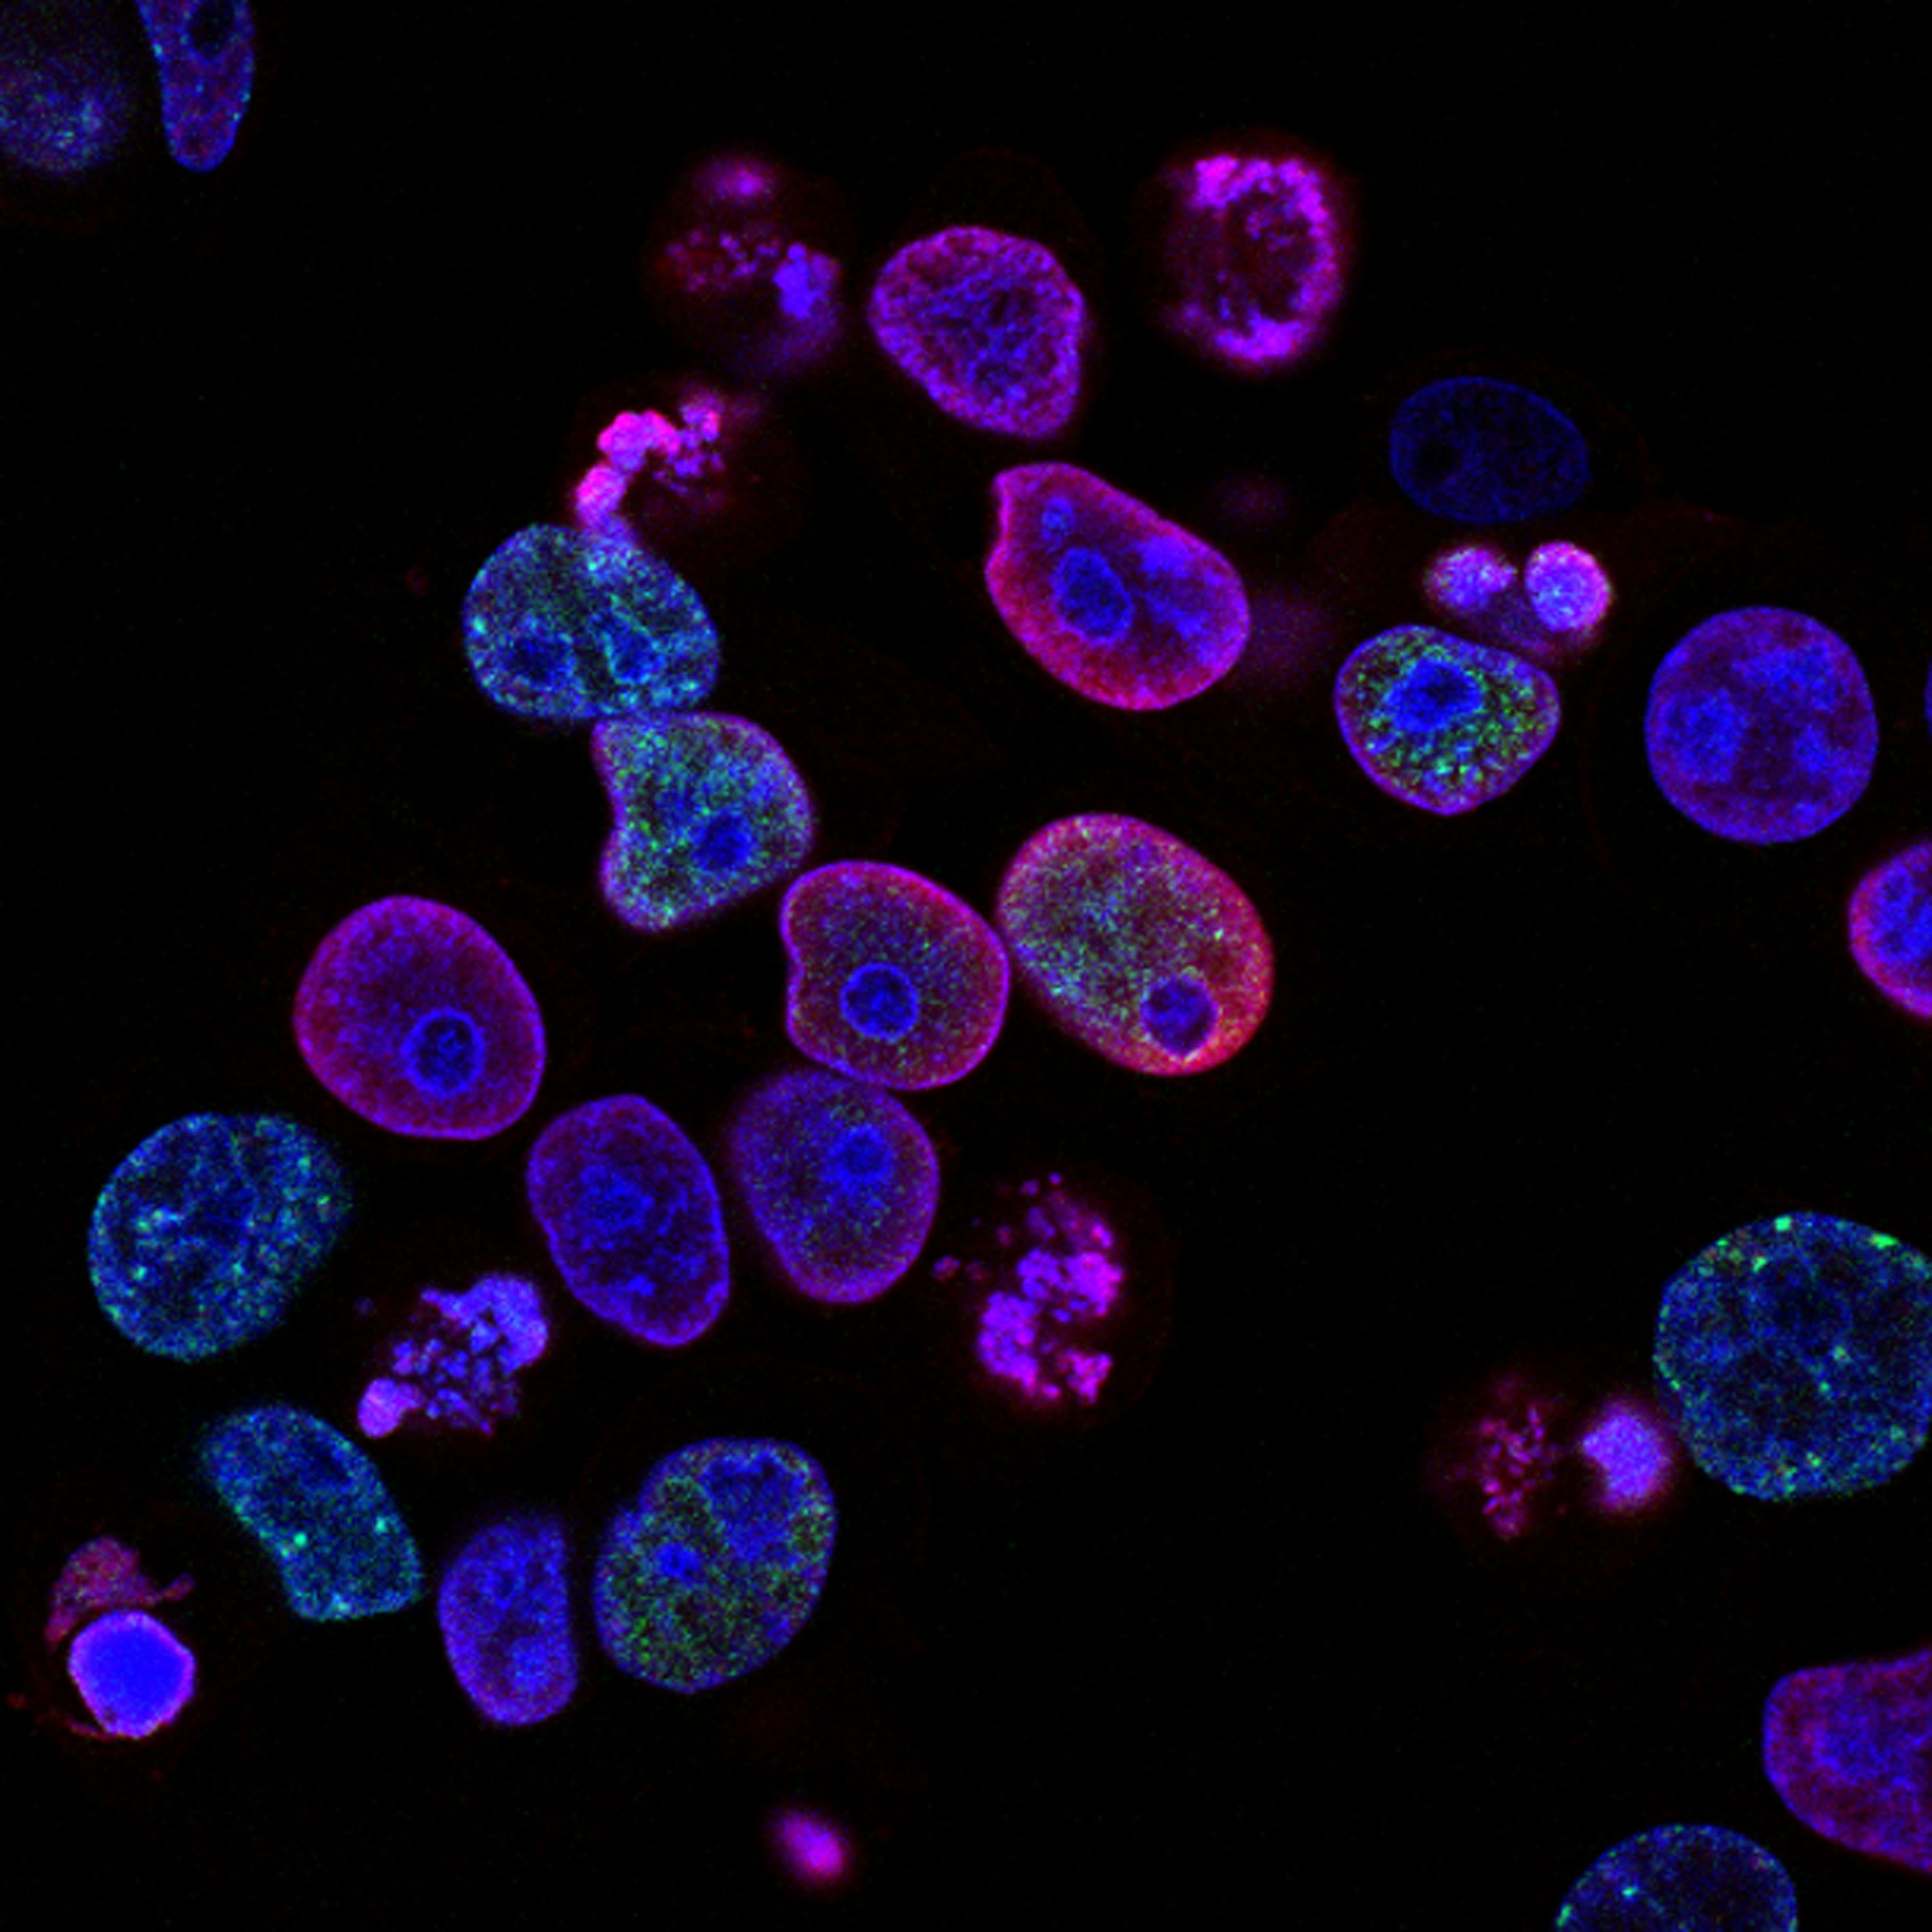 \tHuman colorectal cancer cells treated with a topoisomerase inhibitor and an inhibitor of the protein kinase ATR (ataxia telangiectasia and Rad3 related), a drug combination under study as a cancer therapy. Cell nuclei are stained blue; the chromosomal protein histone gamma-H2AX marks DNA damage in red and foci of DNA replication in green.  Created by Yves Pommier, Rozenn Josse, 2014